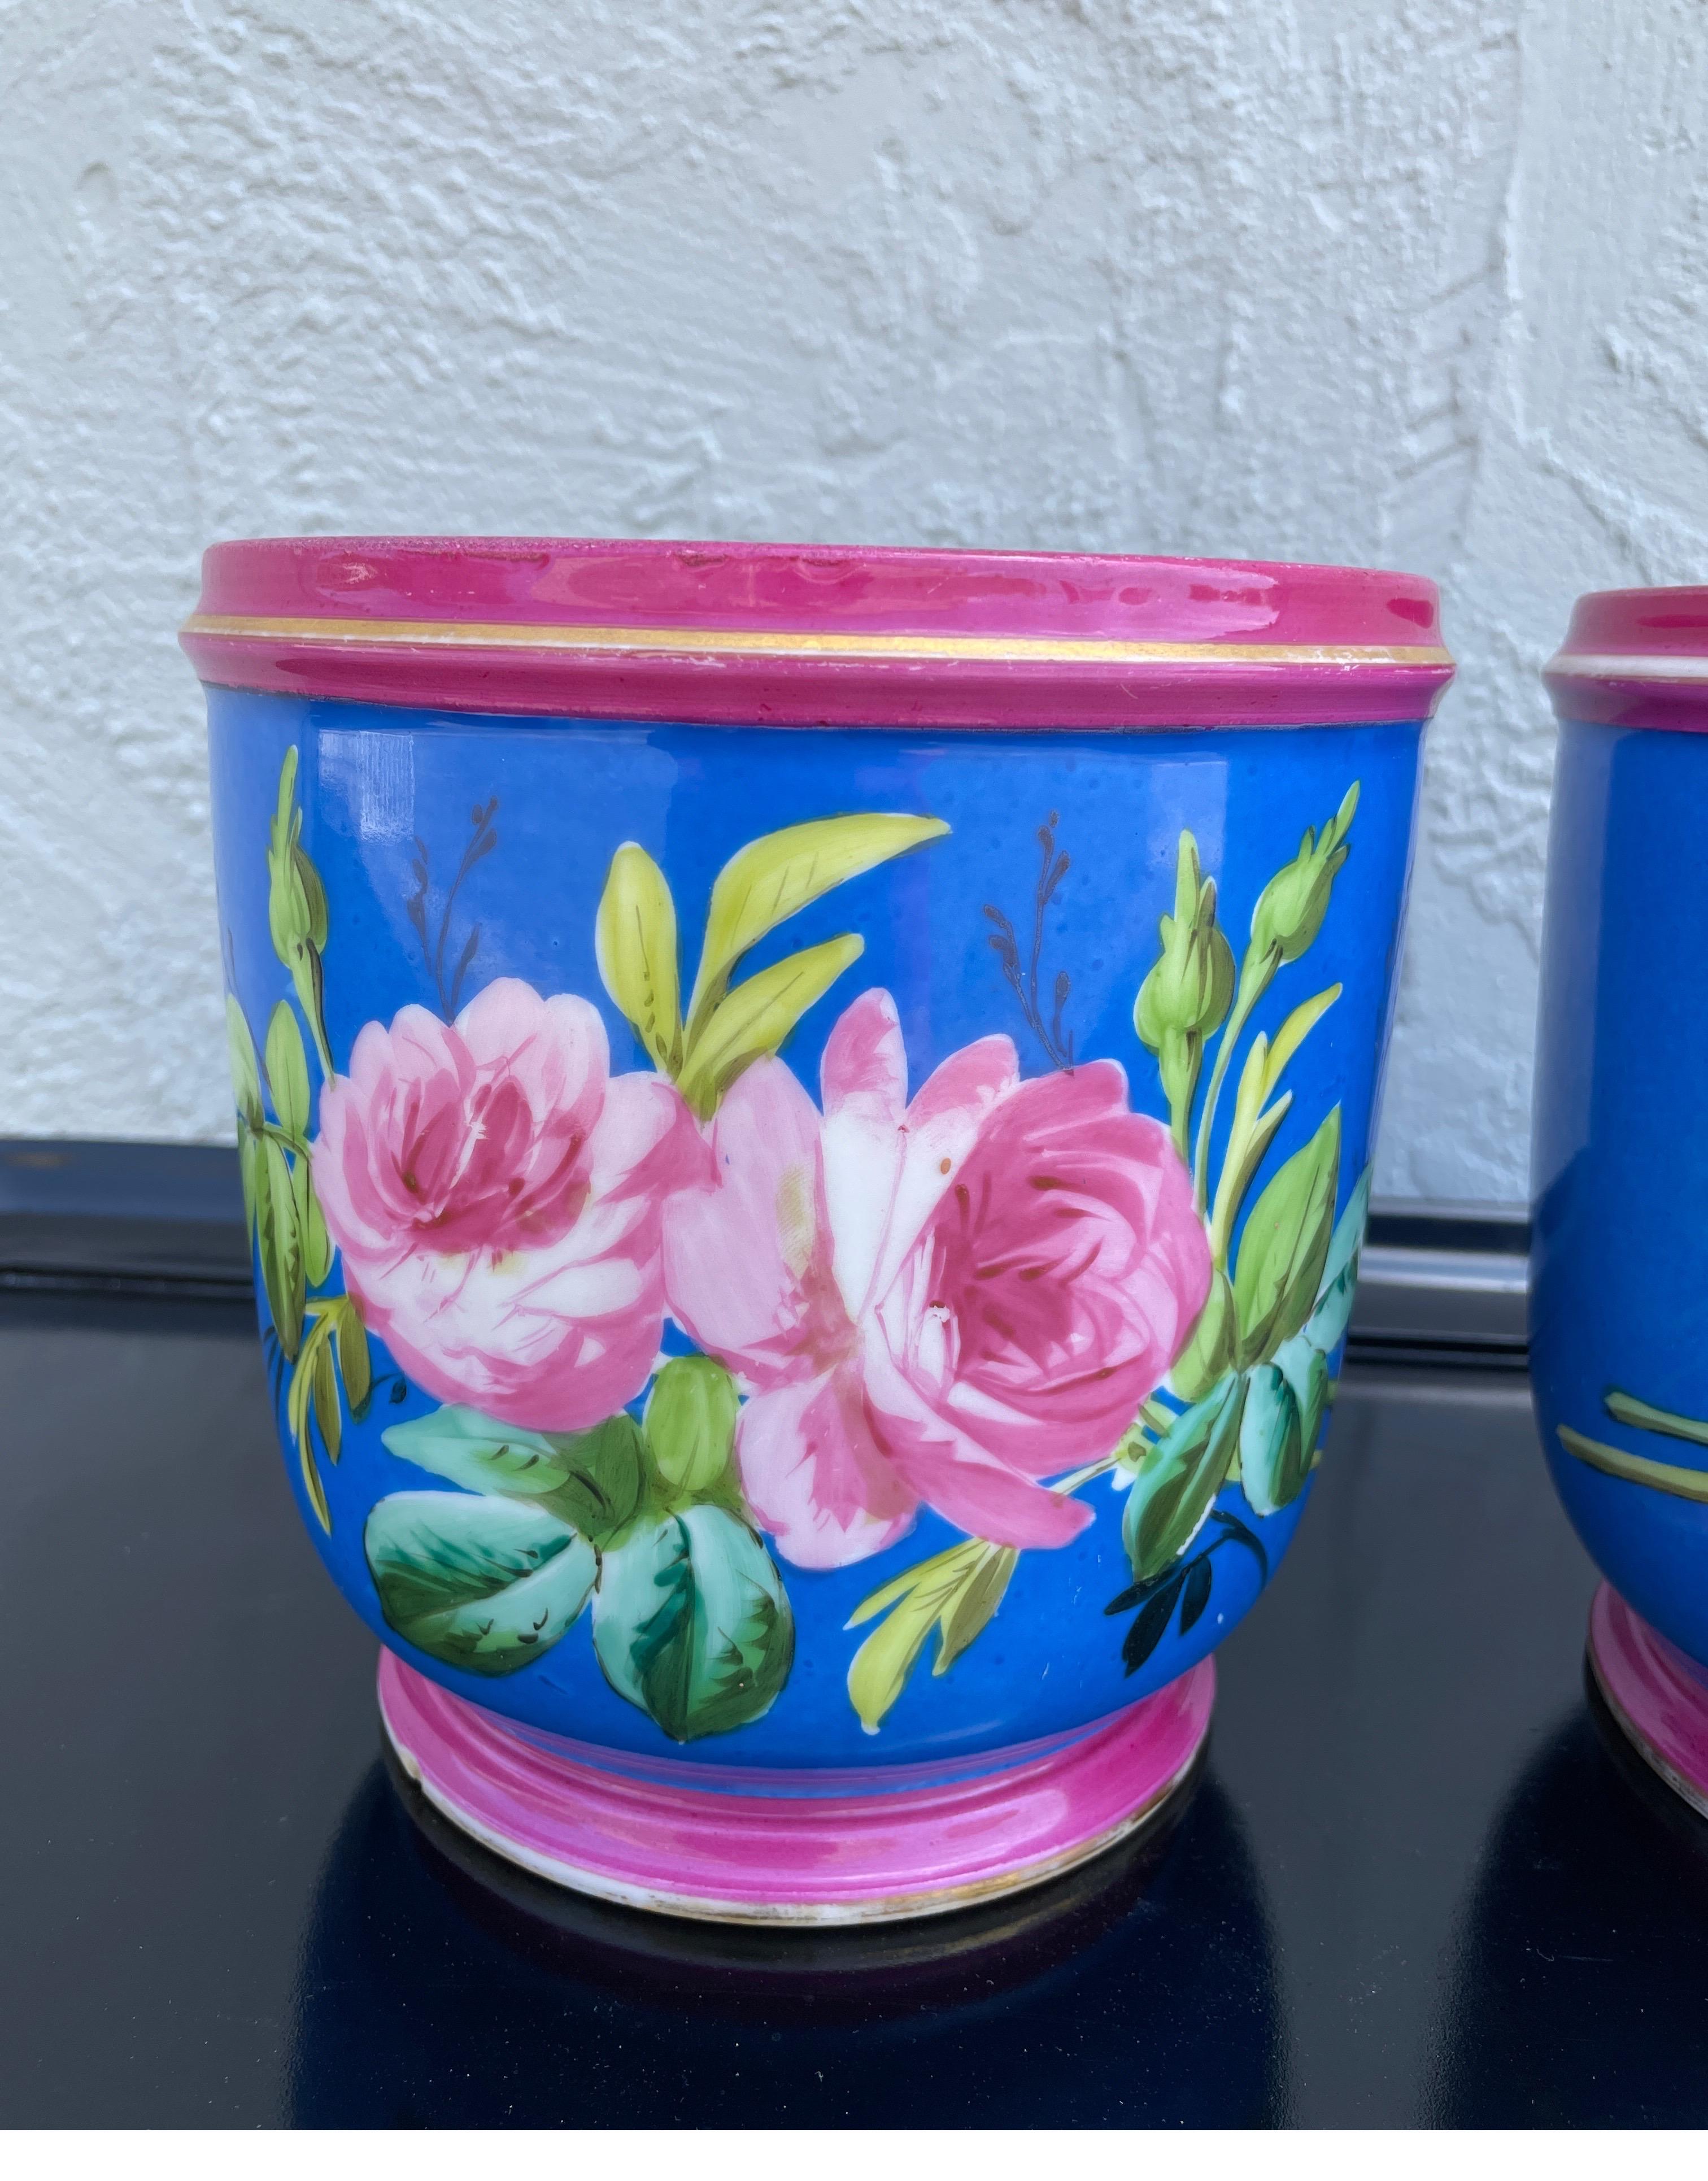 Beautiful pair of Paris Porcelain Cachepots depicting large pink peonies on a brilliant blue background. Paintings are well executed & colors are still vibrant.
These elegant planters will add panache to any setting.